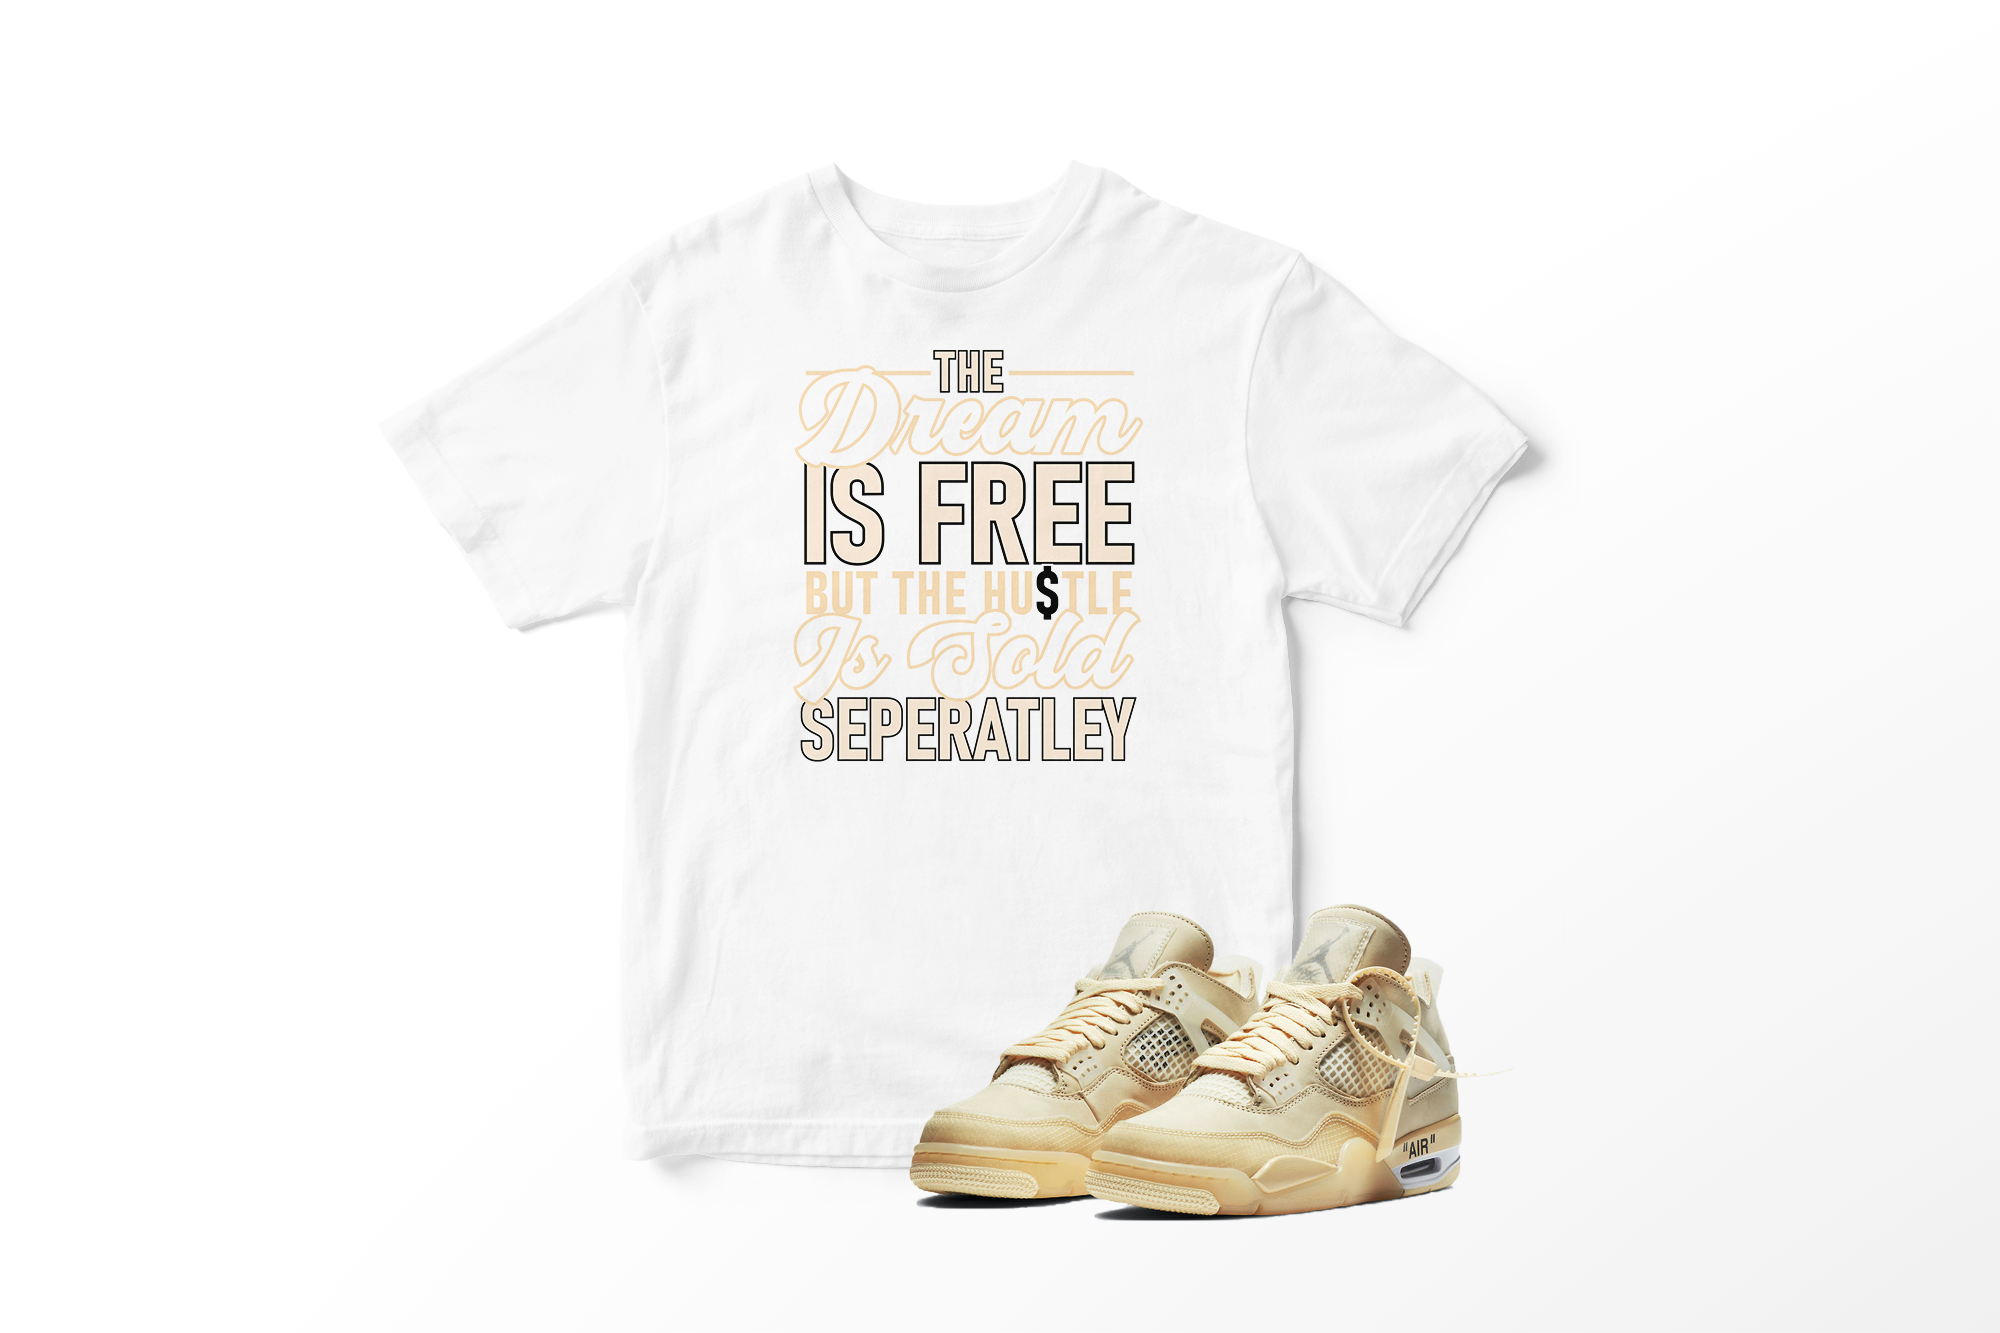 'The Dream Is Free' in Sail CW Short Sleeve Tee